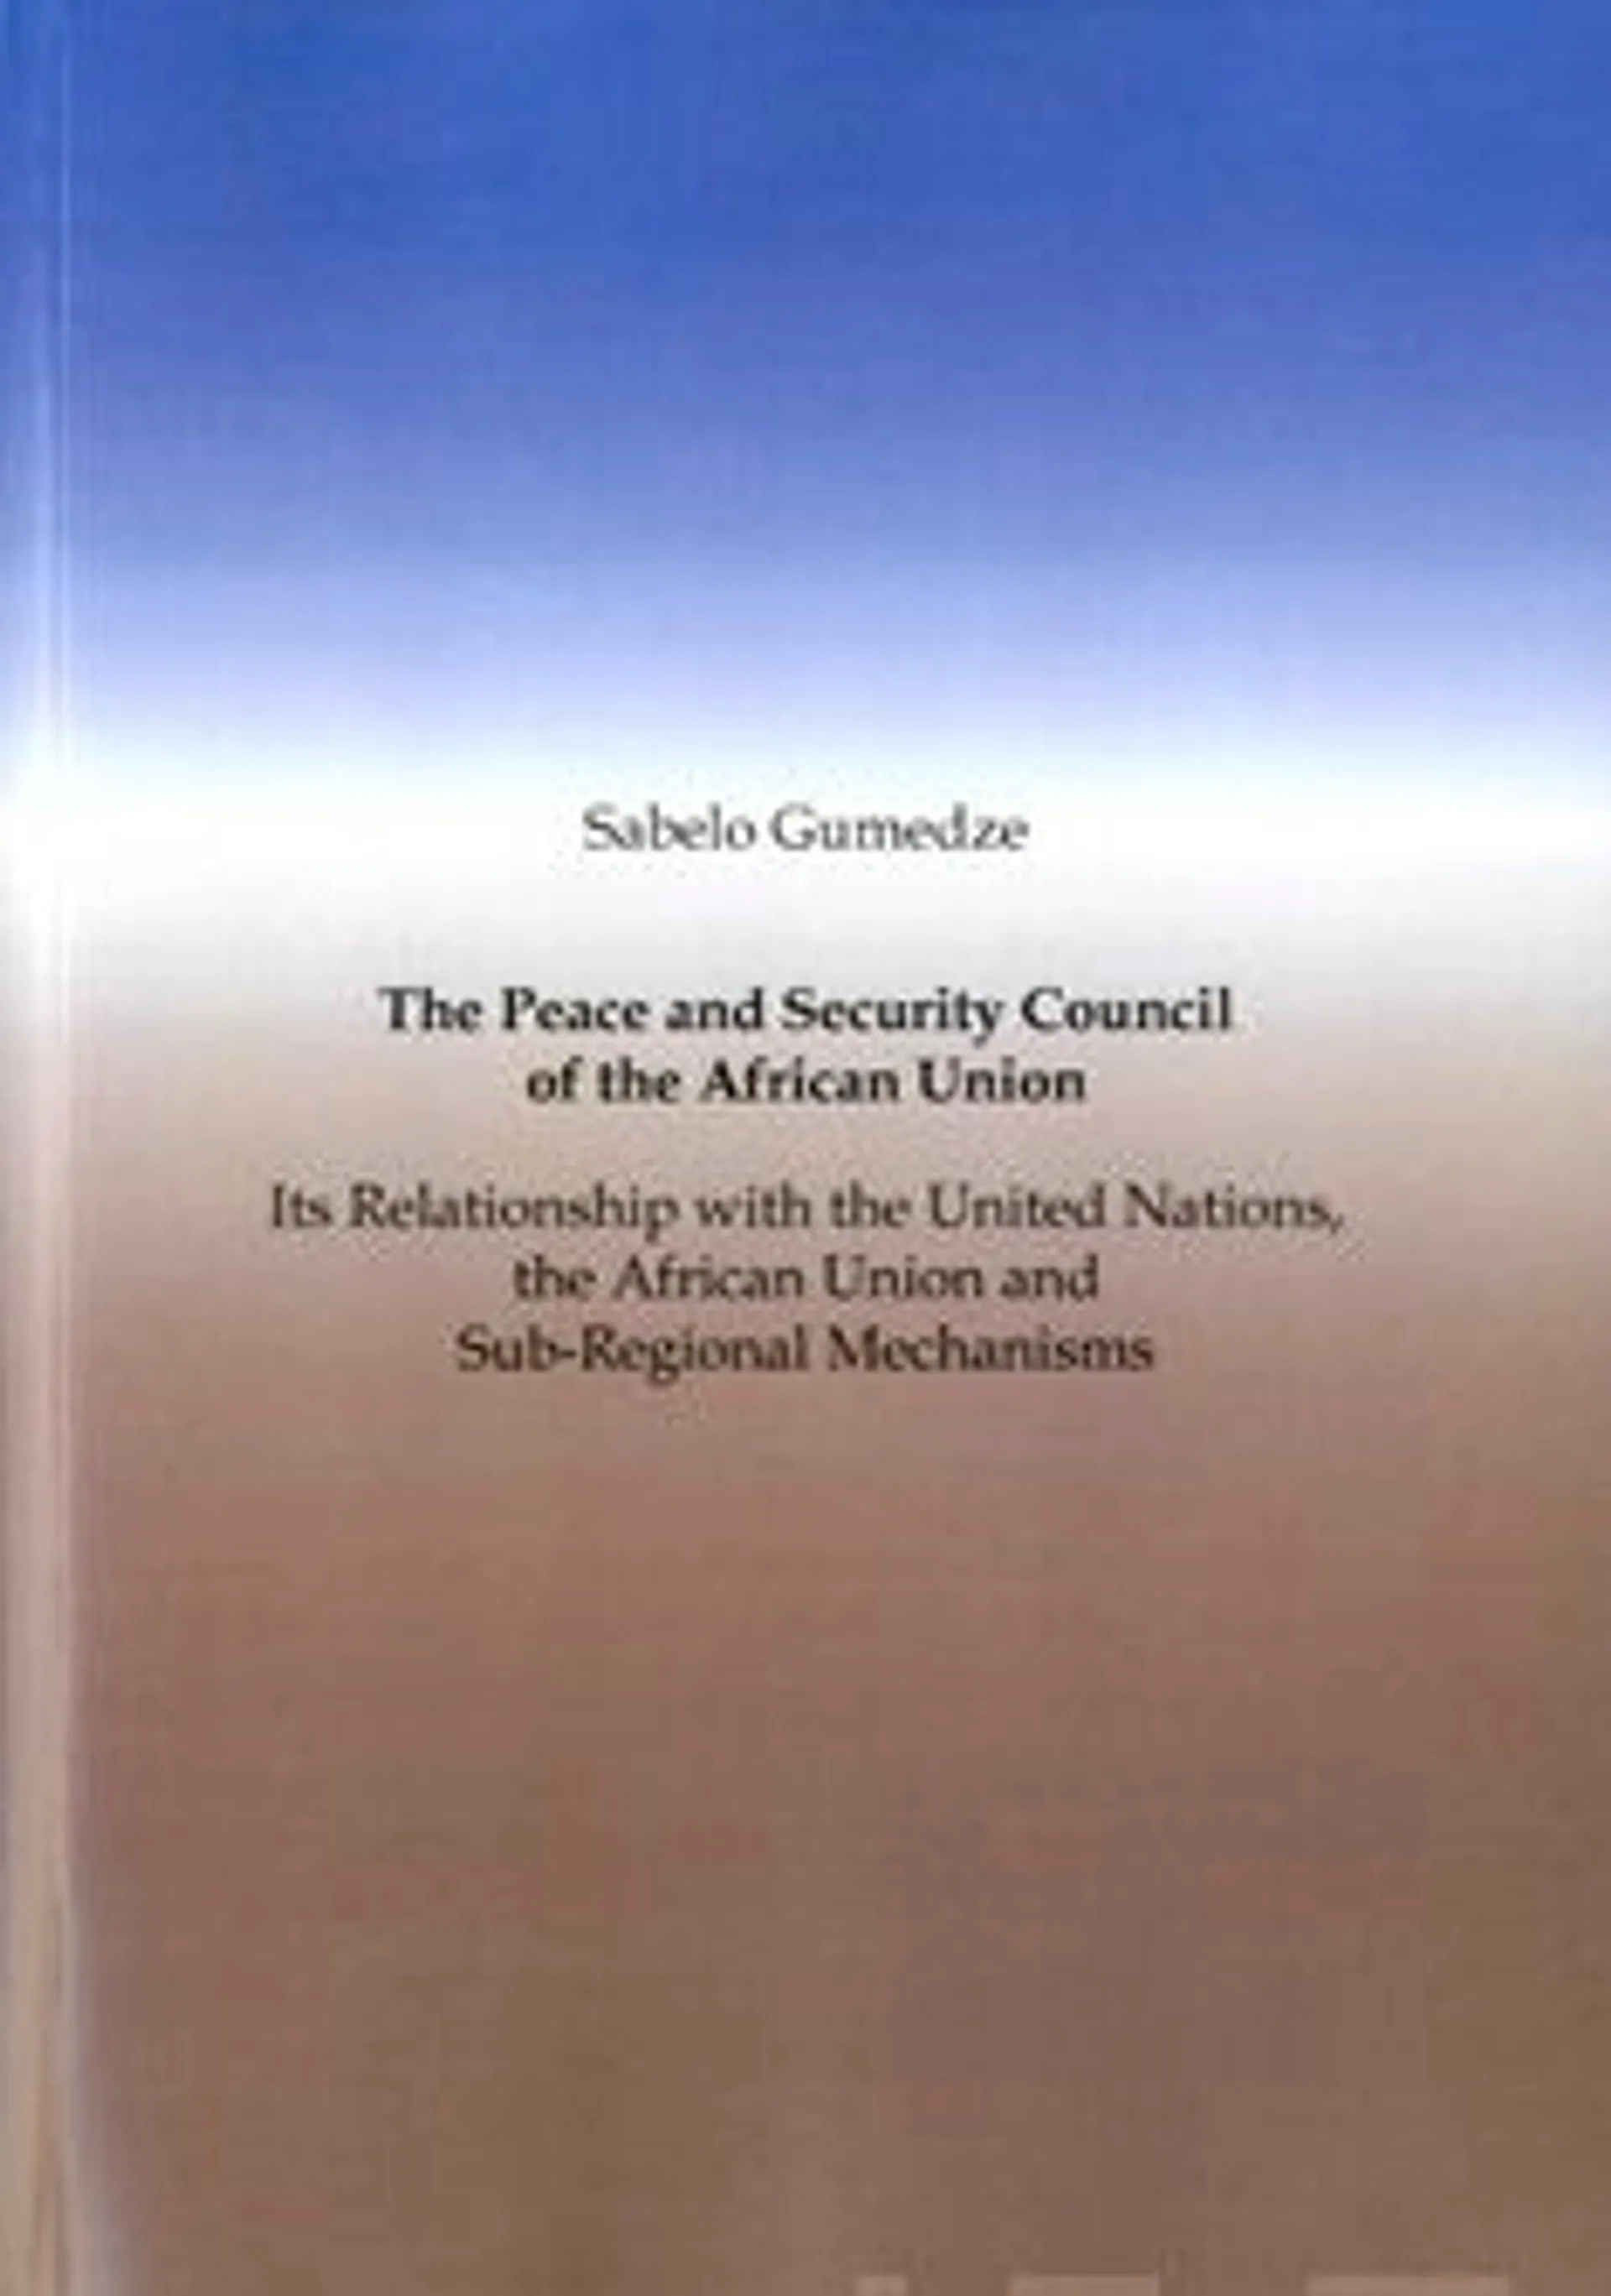 Gumedze, The Peace and Security Council of the African Union